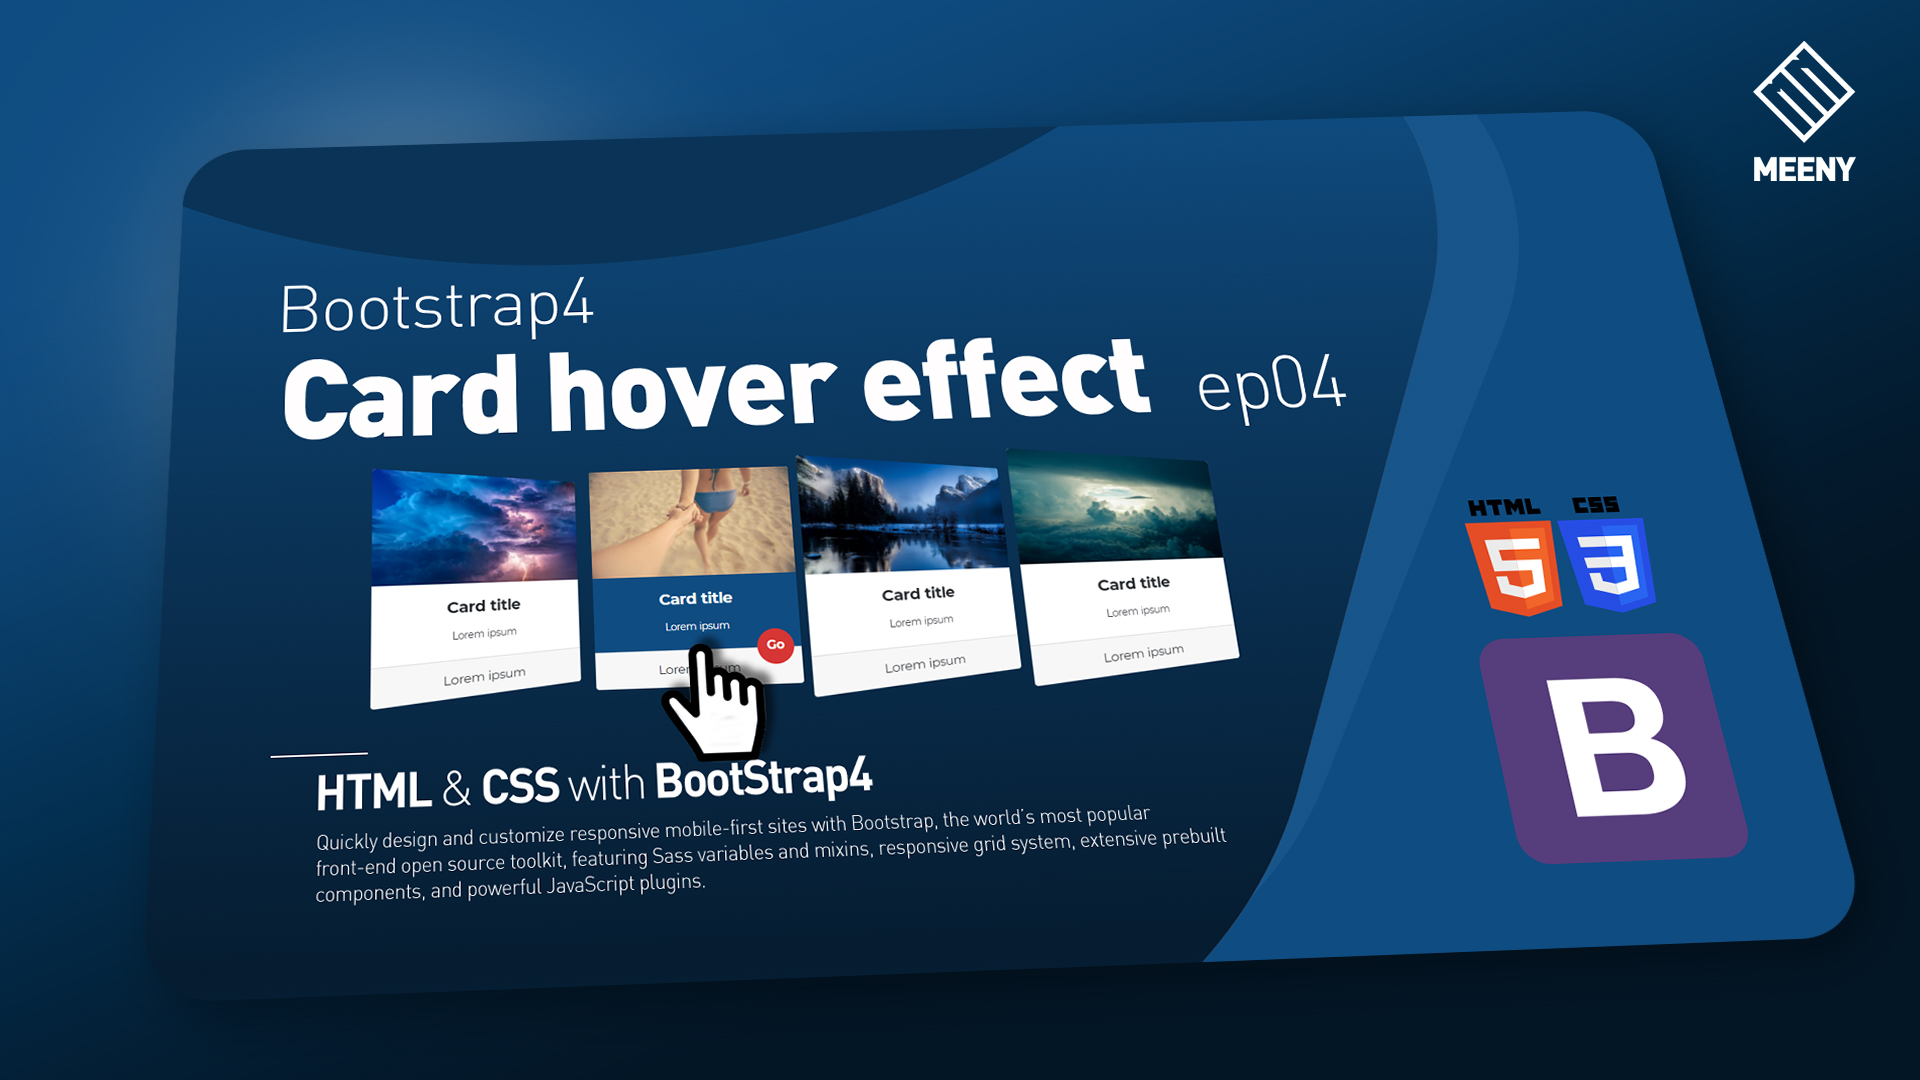 Card hover effect ep04 – Bootstrap4 – Meeny